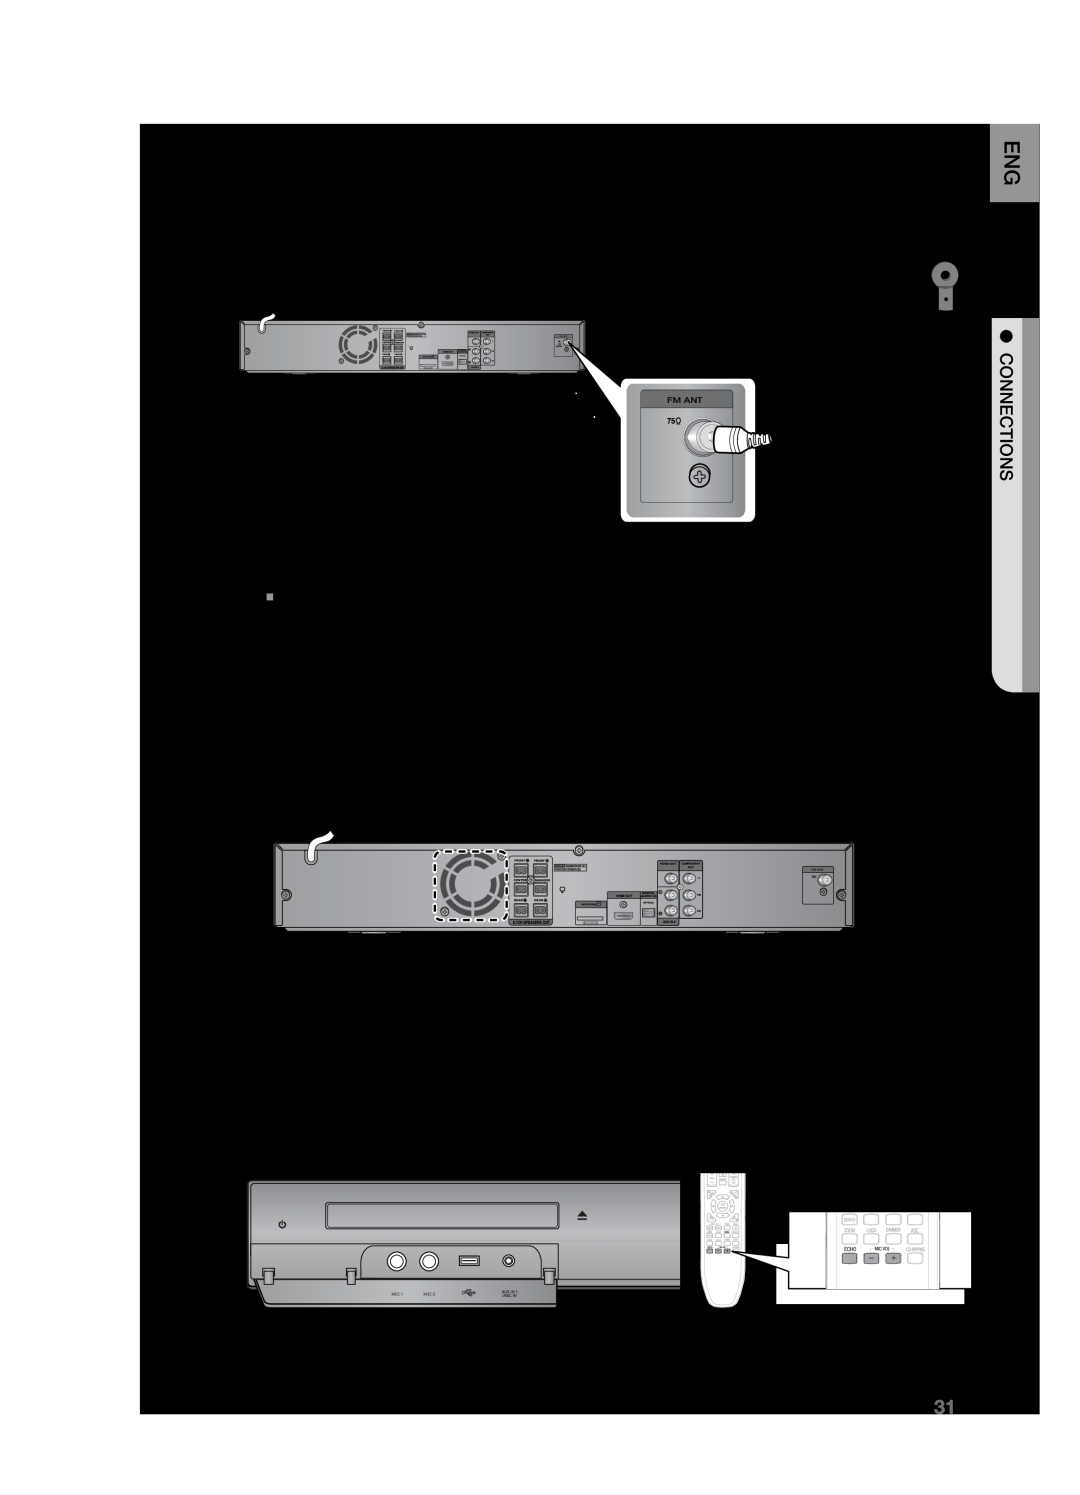 Samsung HT-TZ325R/XER, HT-Z220T/MEA, HT-TZ325T/SIM manual Connecting the FM Antenna, Connecting Microphone, Cooling Fan 